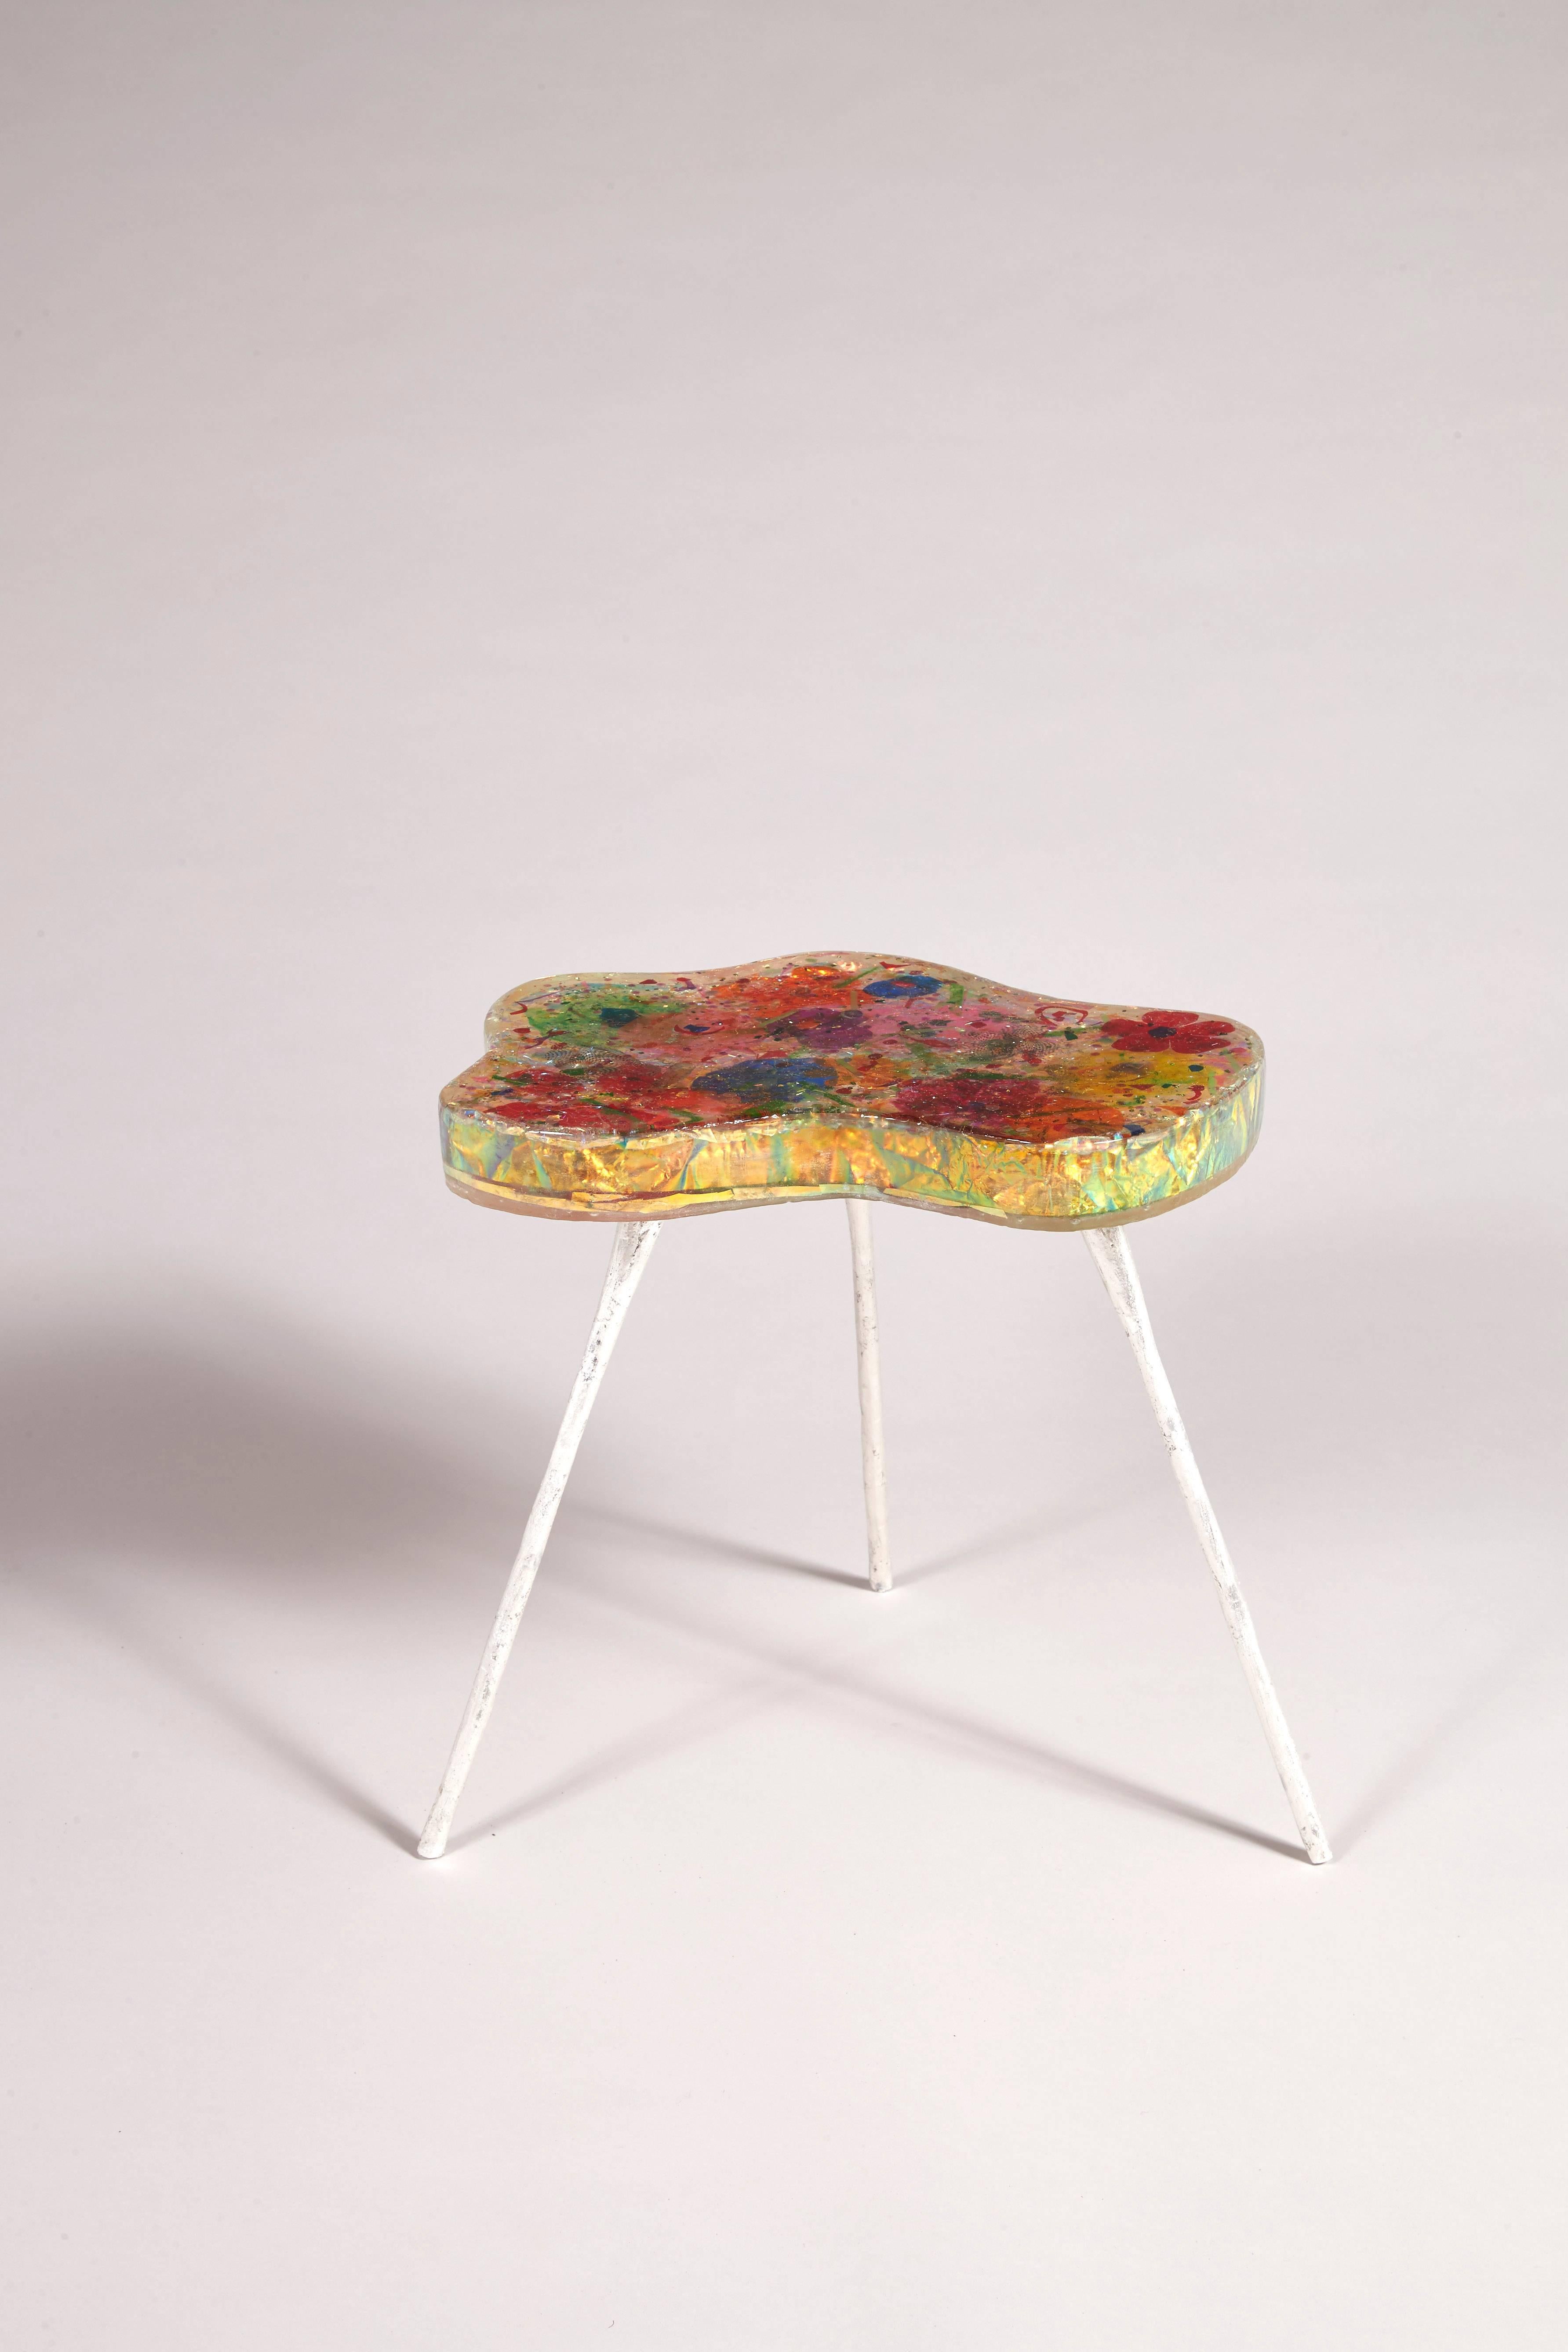 Side table,

2017.

Unique piece

Resin, inclusions, aluminum leaf.

Dia 17 1/8 x H 13 5/8 in.

For the past fifteen years, Hélène has been creating an extensive range of compelling works in her home-studio-laboratory on the outskirts of Paris. They